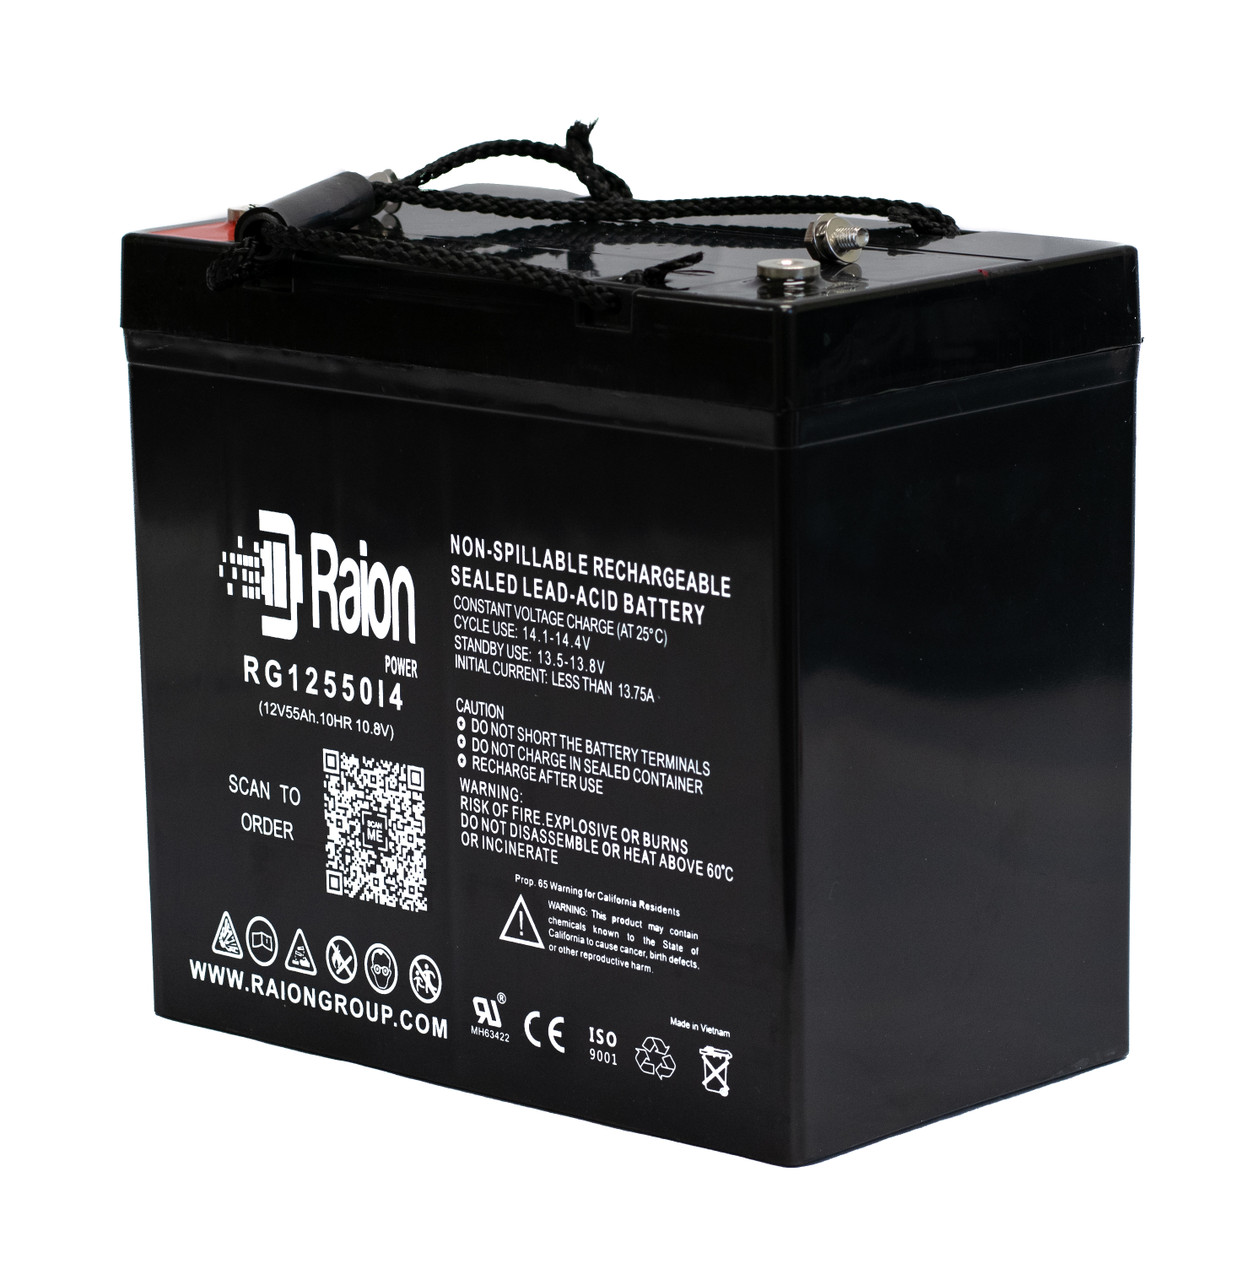 Raion Power Replacement 12V 55Ah Battery for TN Power TN12-55 - 1 Pack